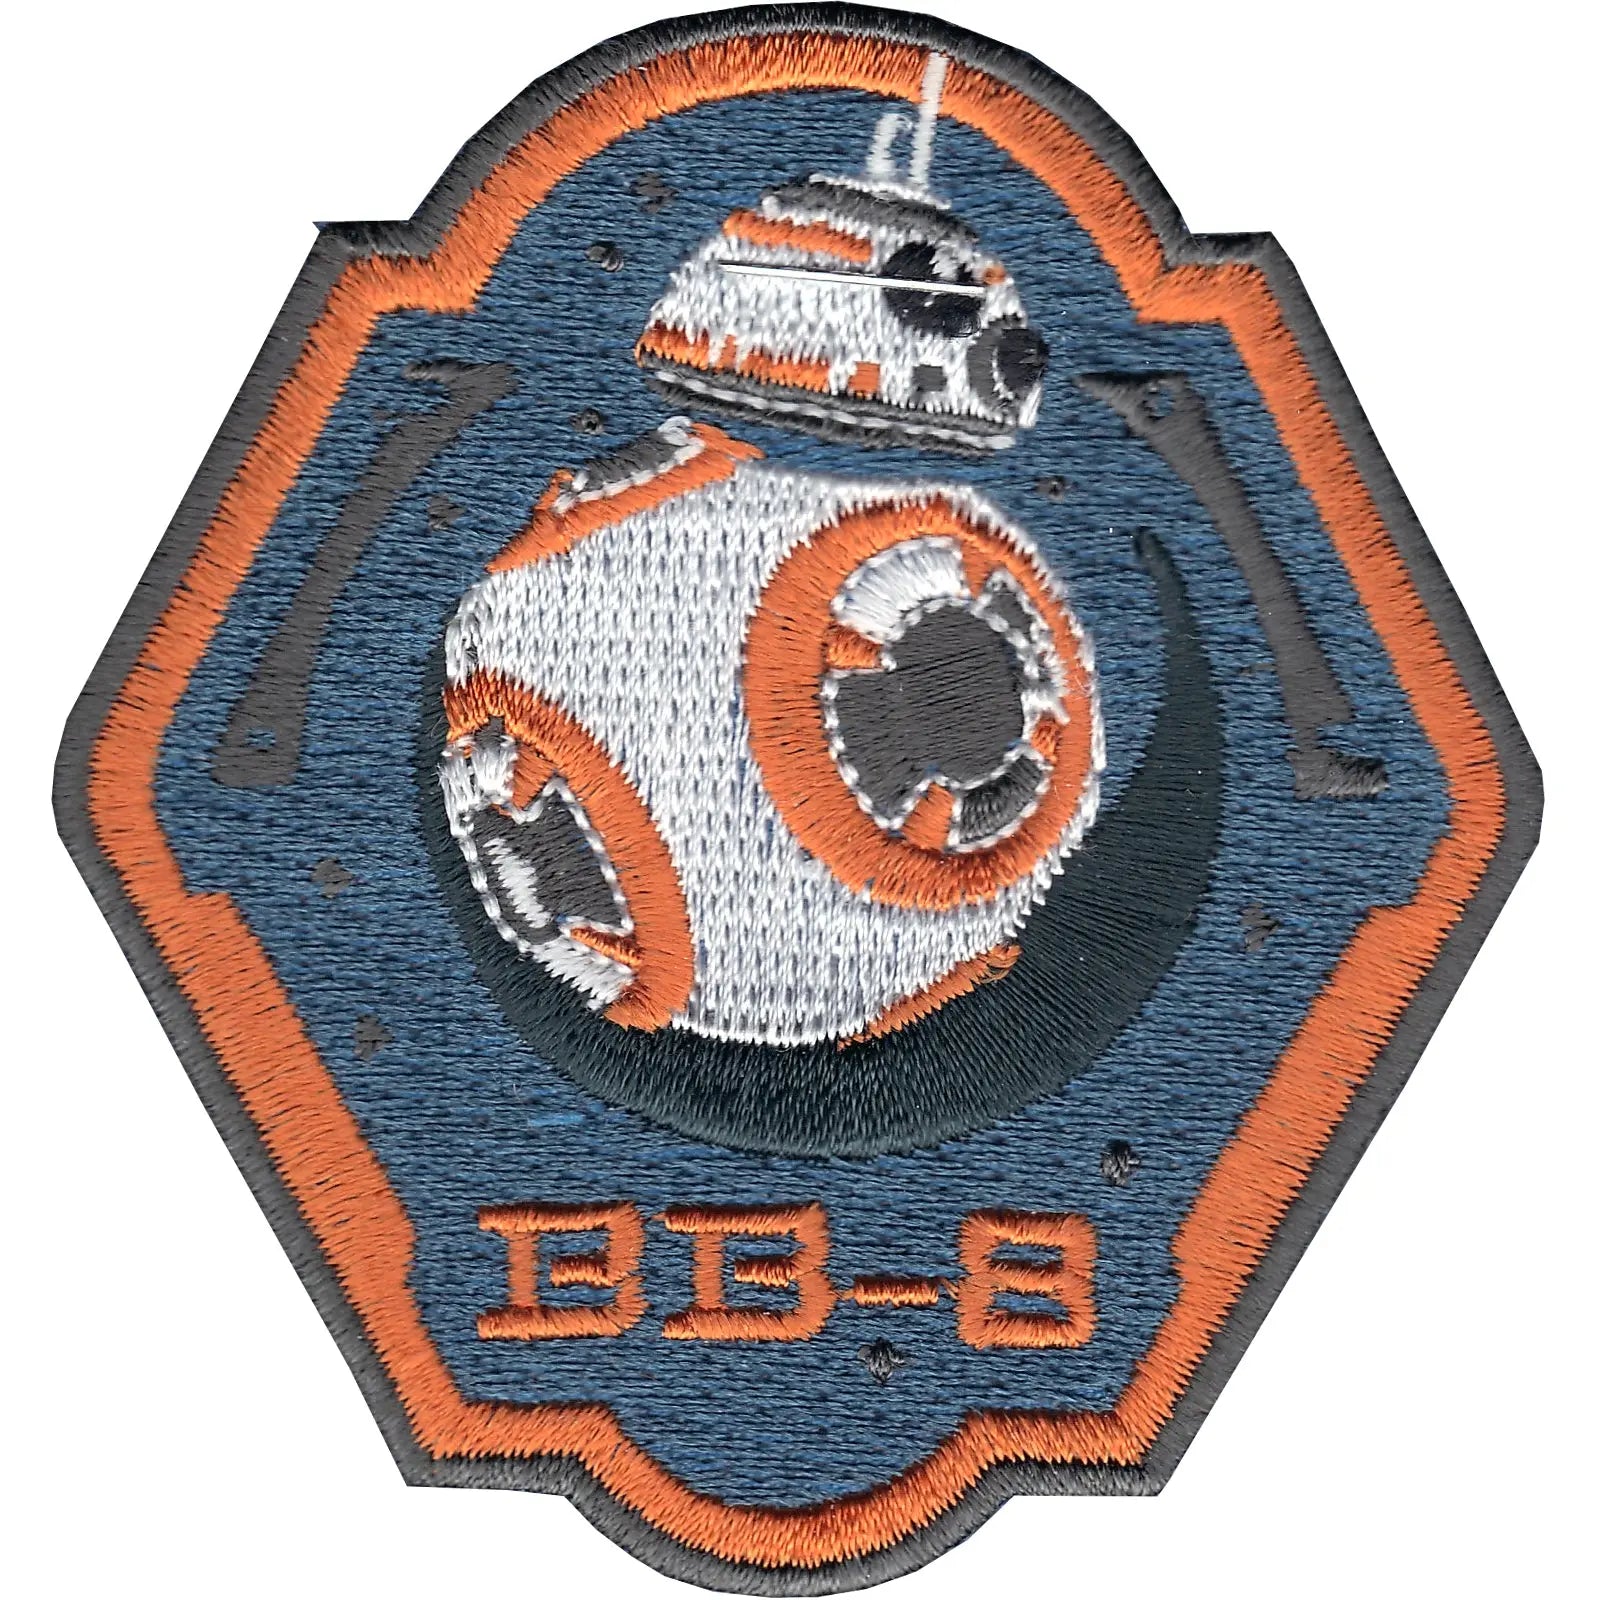 Star Wars Official 'BB-8' Iron On Patch (Orange Border) 